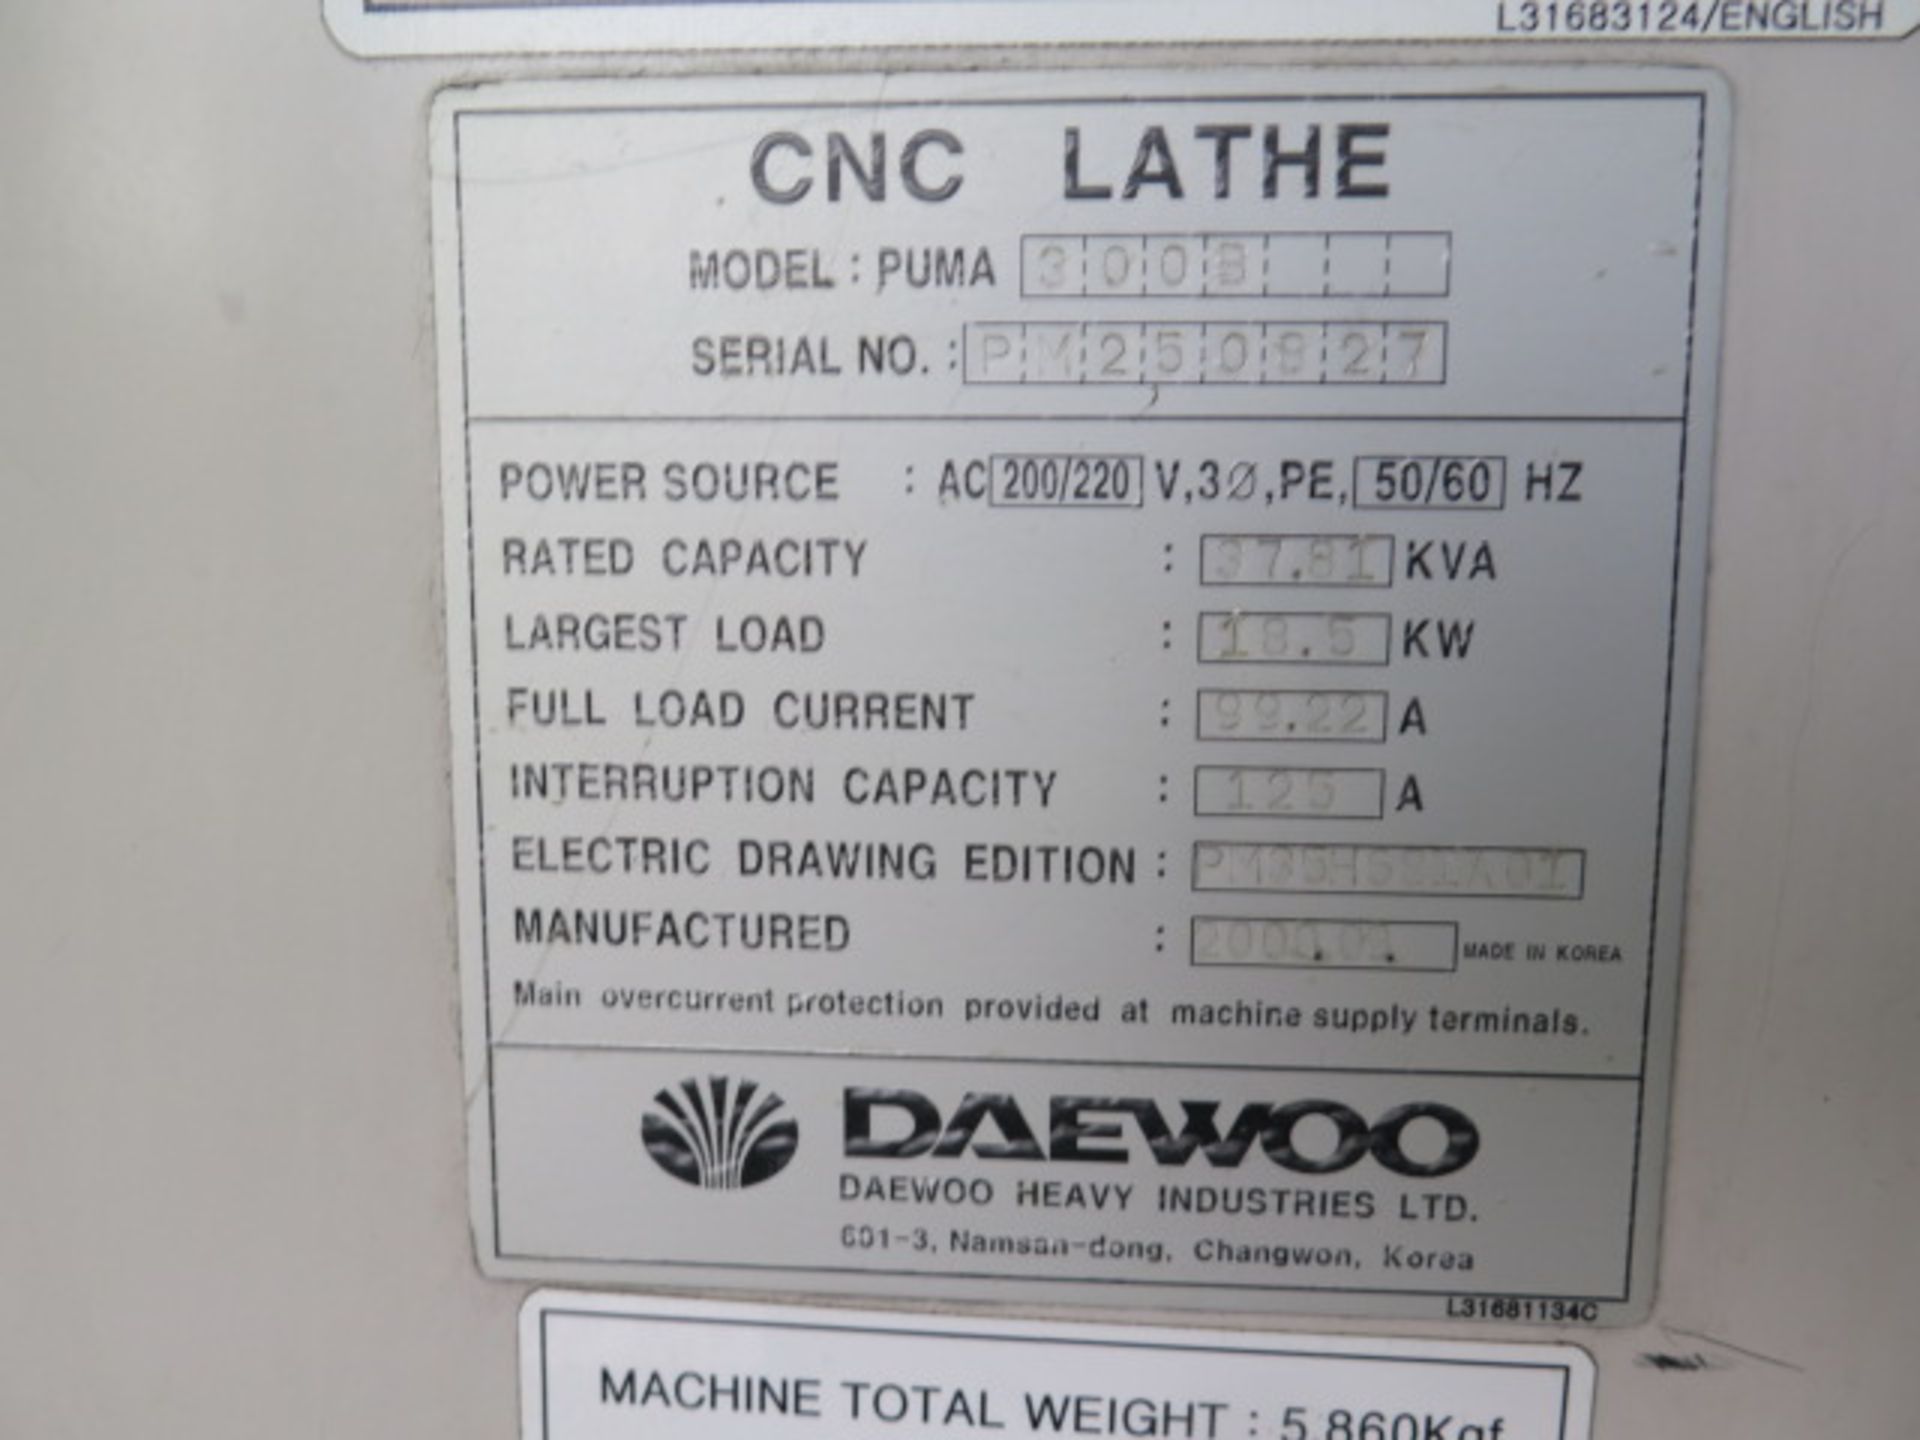 2000 Daewoo PUMA 300B CNC Turning Center s/n PN250827 w/ Fanuc Series 18i-T Controls, SOLD AS IS - Image 15 of 15